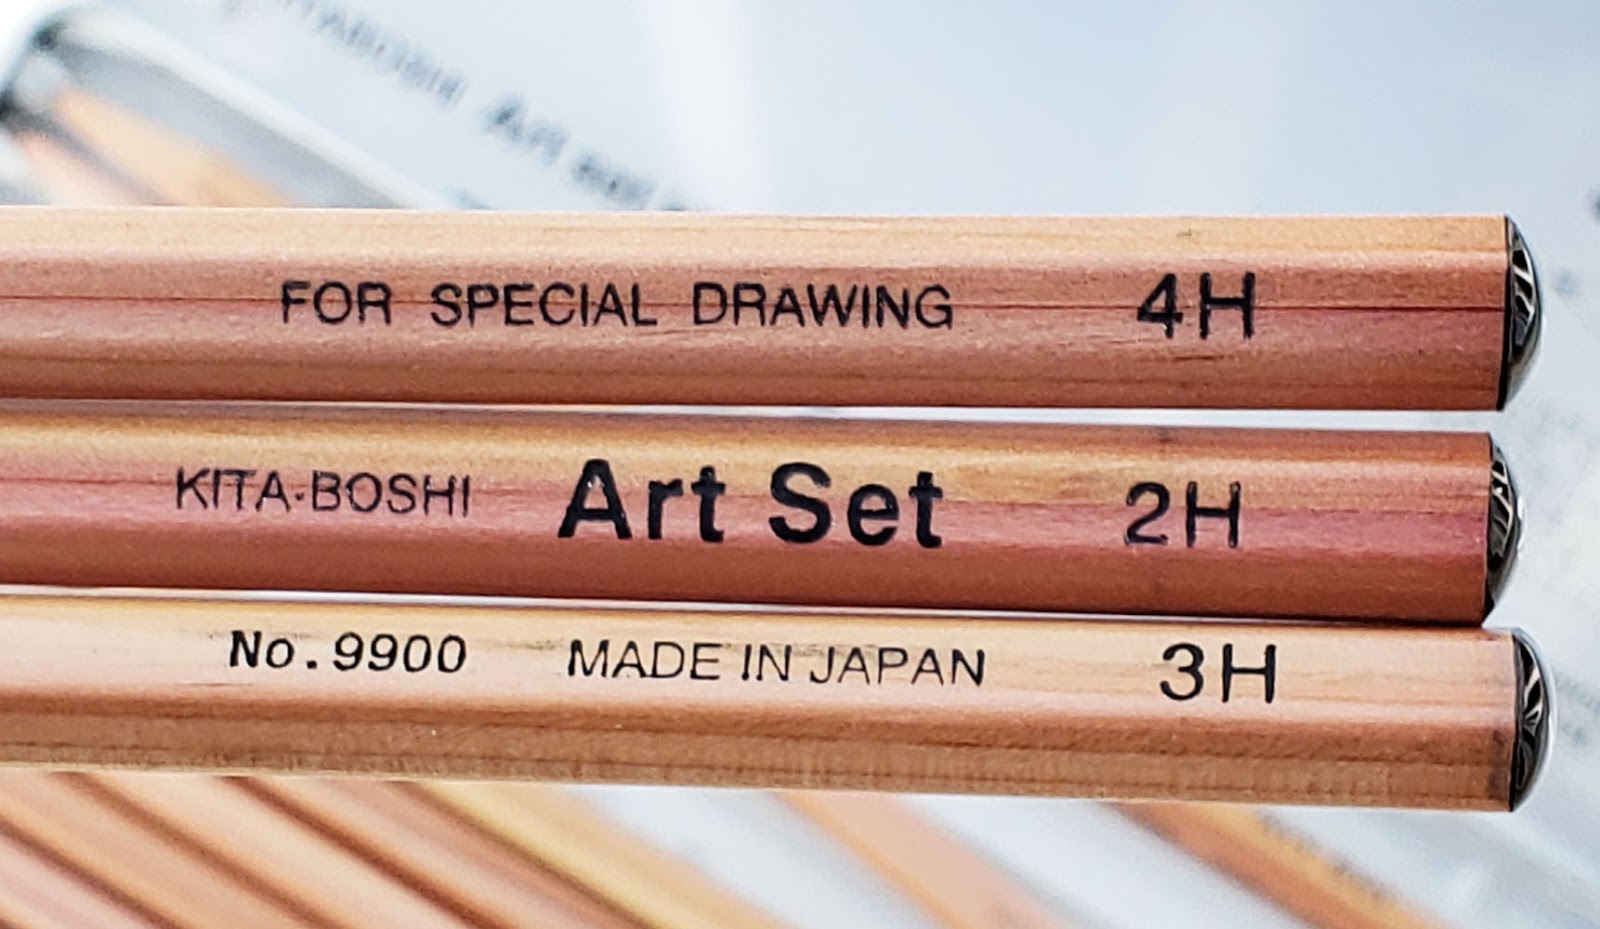 Fueled by Clouds & Coffee: Graphite Pencil Review: Kitaboshi Art Set